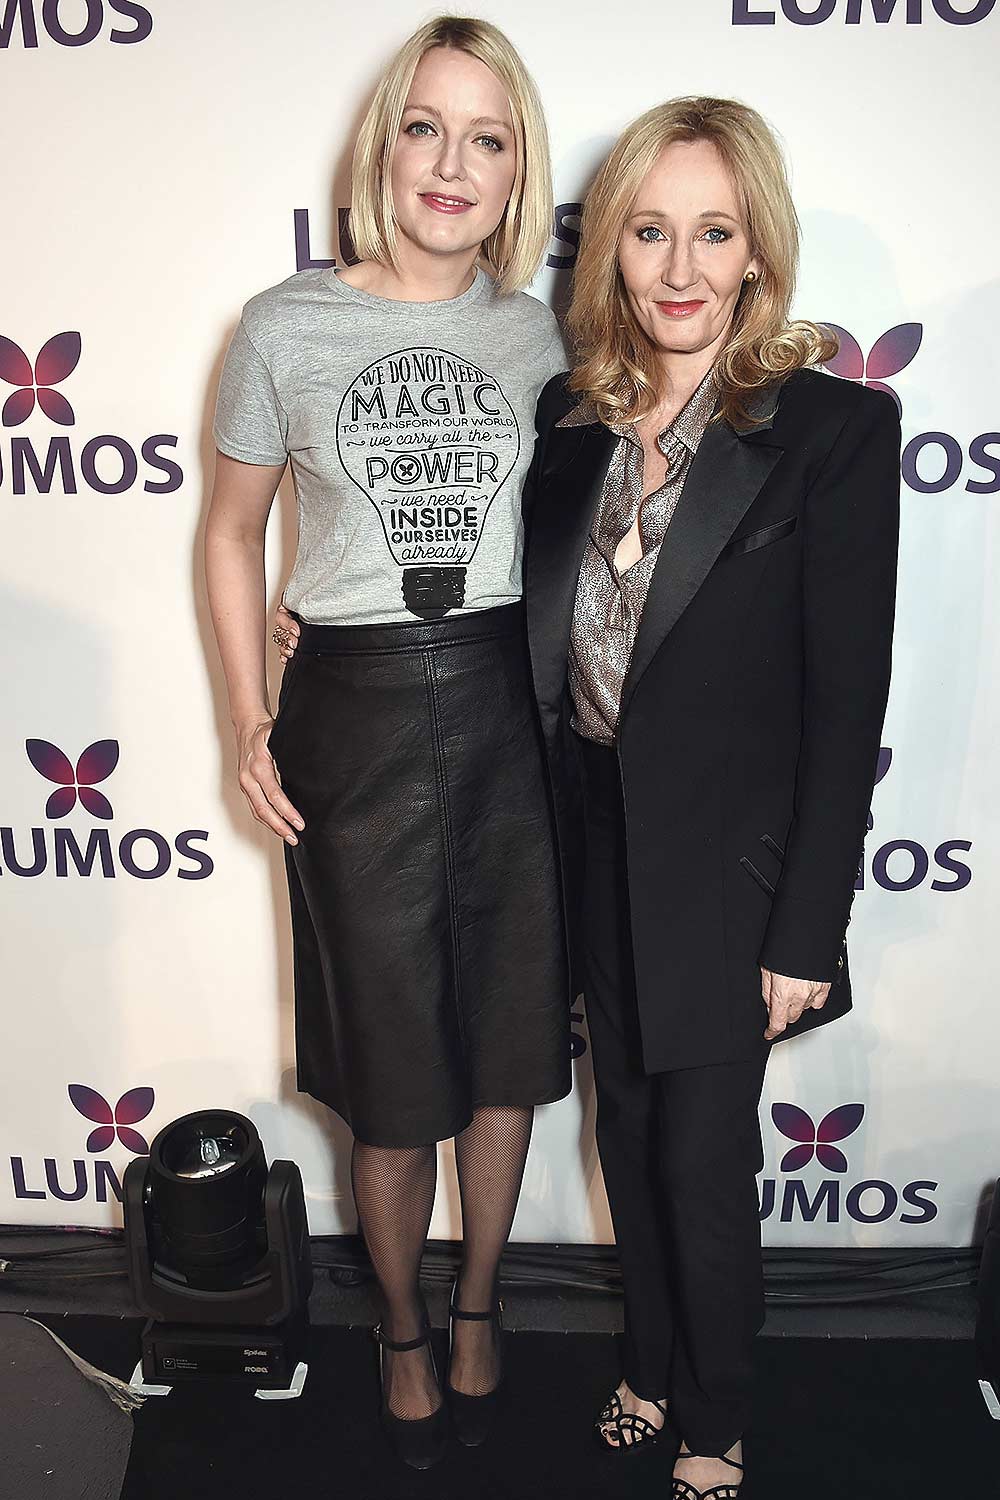 Lauren Laverne attends the Lumos Fundraiser in aid of J.K. Rowling’s international